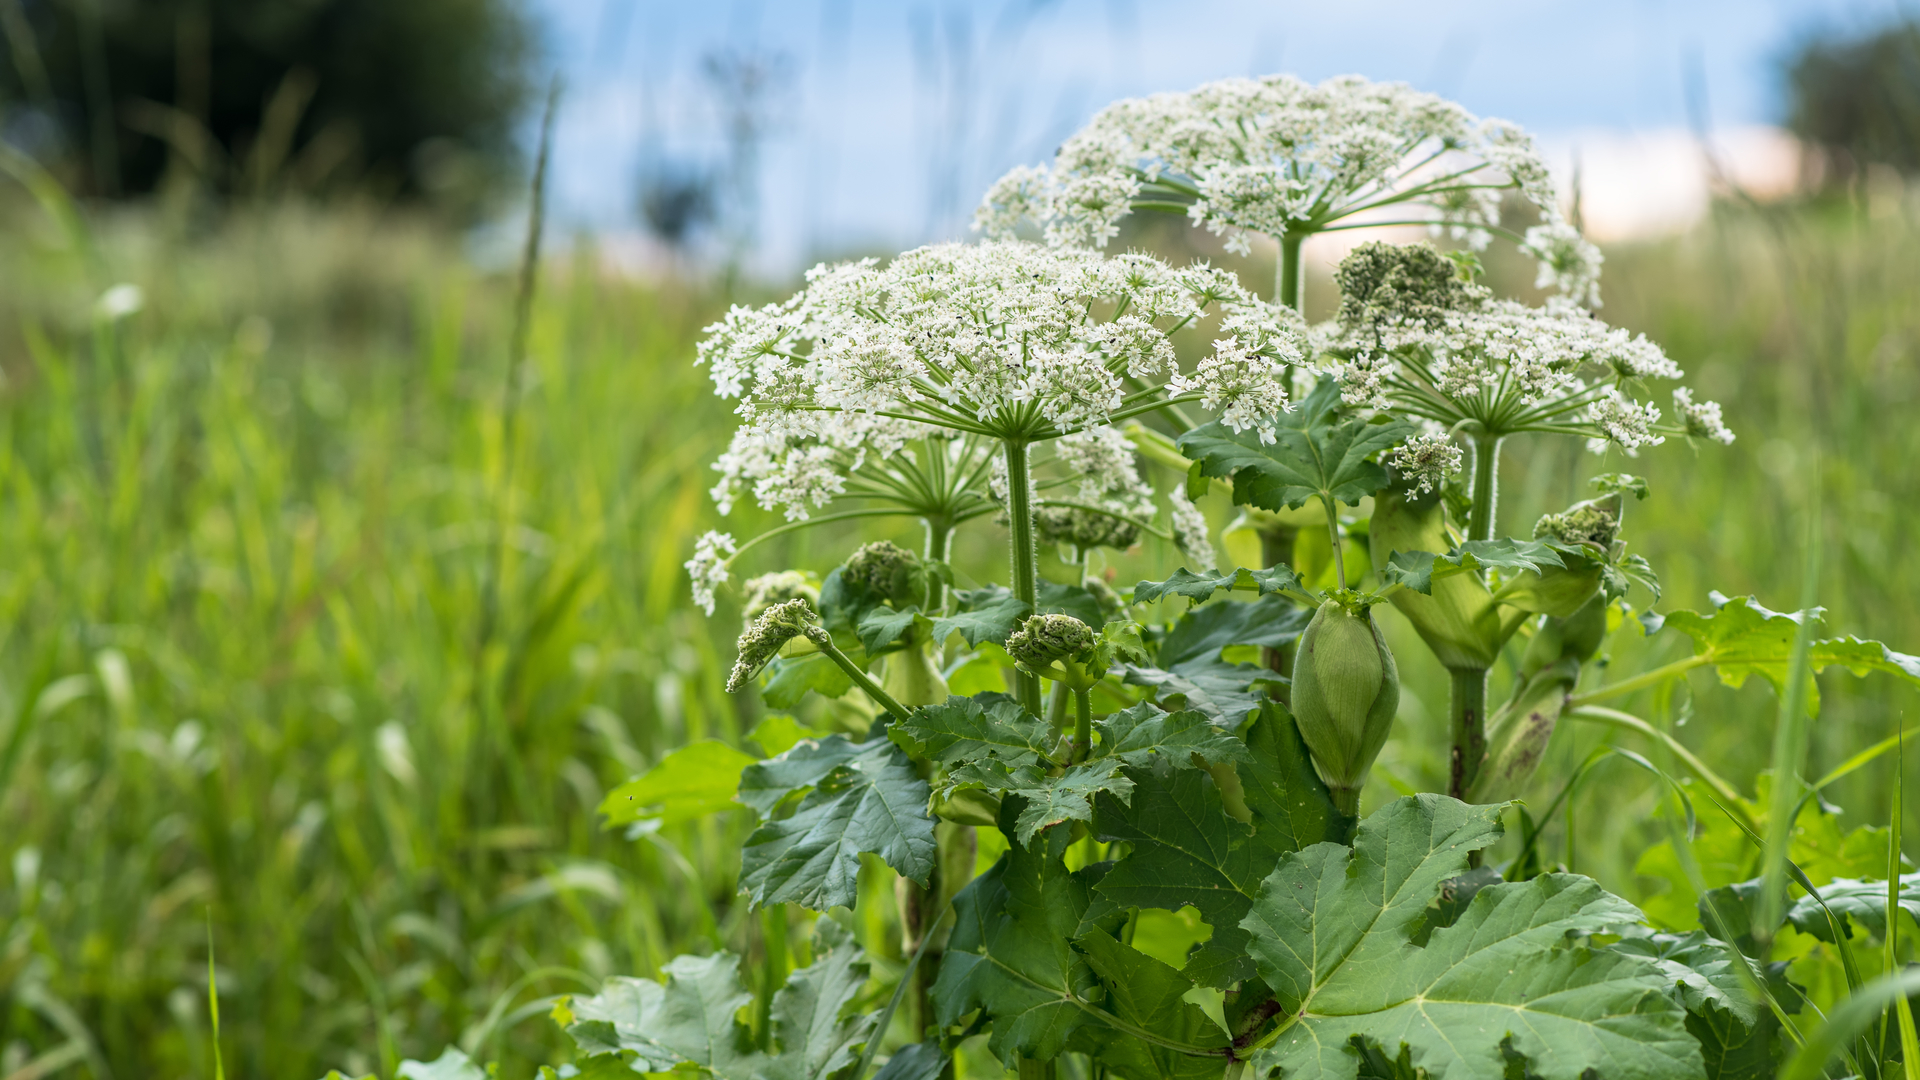 Giant hogweed, an invasive plant whose sap can cause burns and scarring.